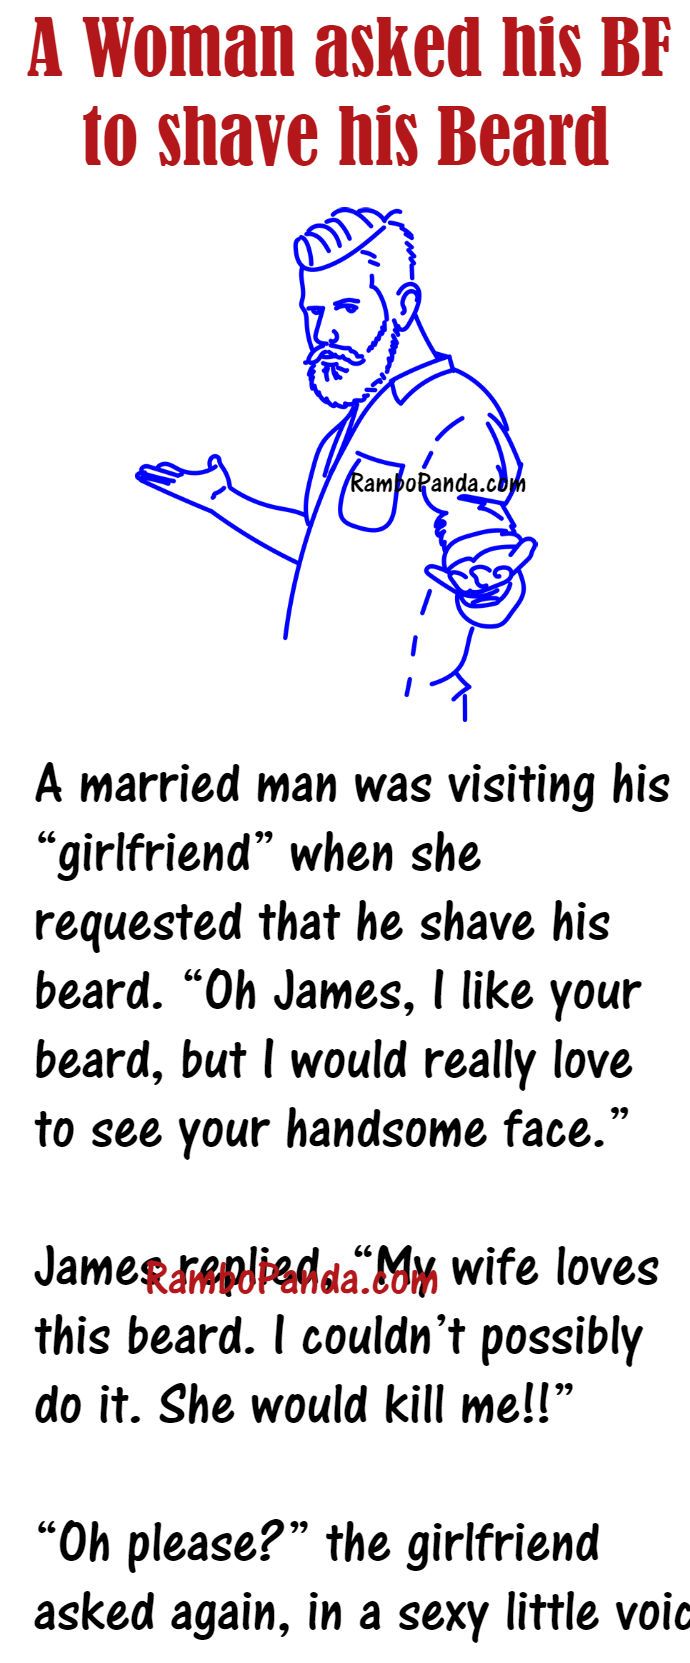 When a Woman was trying to Convince her Married BF to shave his Beard ...